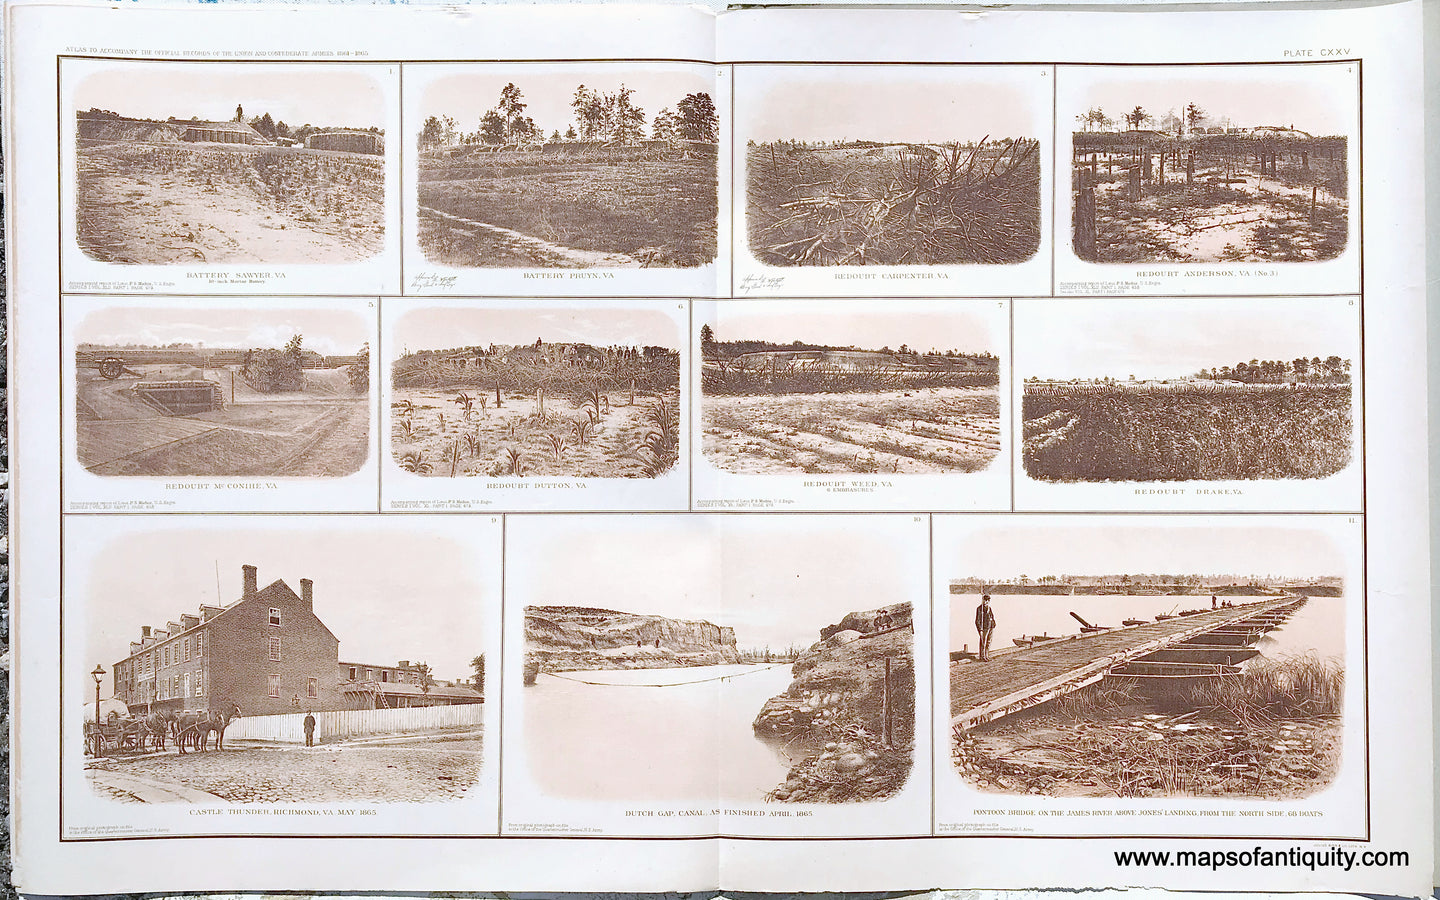 Antique-Lithograph-Print-Plate-125.-Eight-photographic-views-of-Batteries-and-Redoubts-in-Va..-Three-photographic-views-of-Castle-Thunder-Richmond-Va.-May-1865-Dutch-Gap-Canal-as-finished-April-1865-and-Pontoon-Bridge-on-the-James-River.-1894-US-War-Dept.-Civil-War-Civil-War-1800s-19th-century-Maps-of-Antiquity